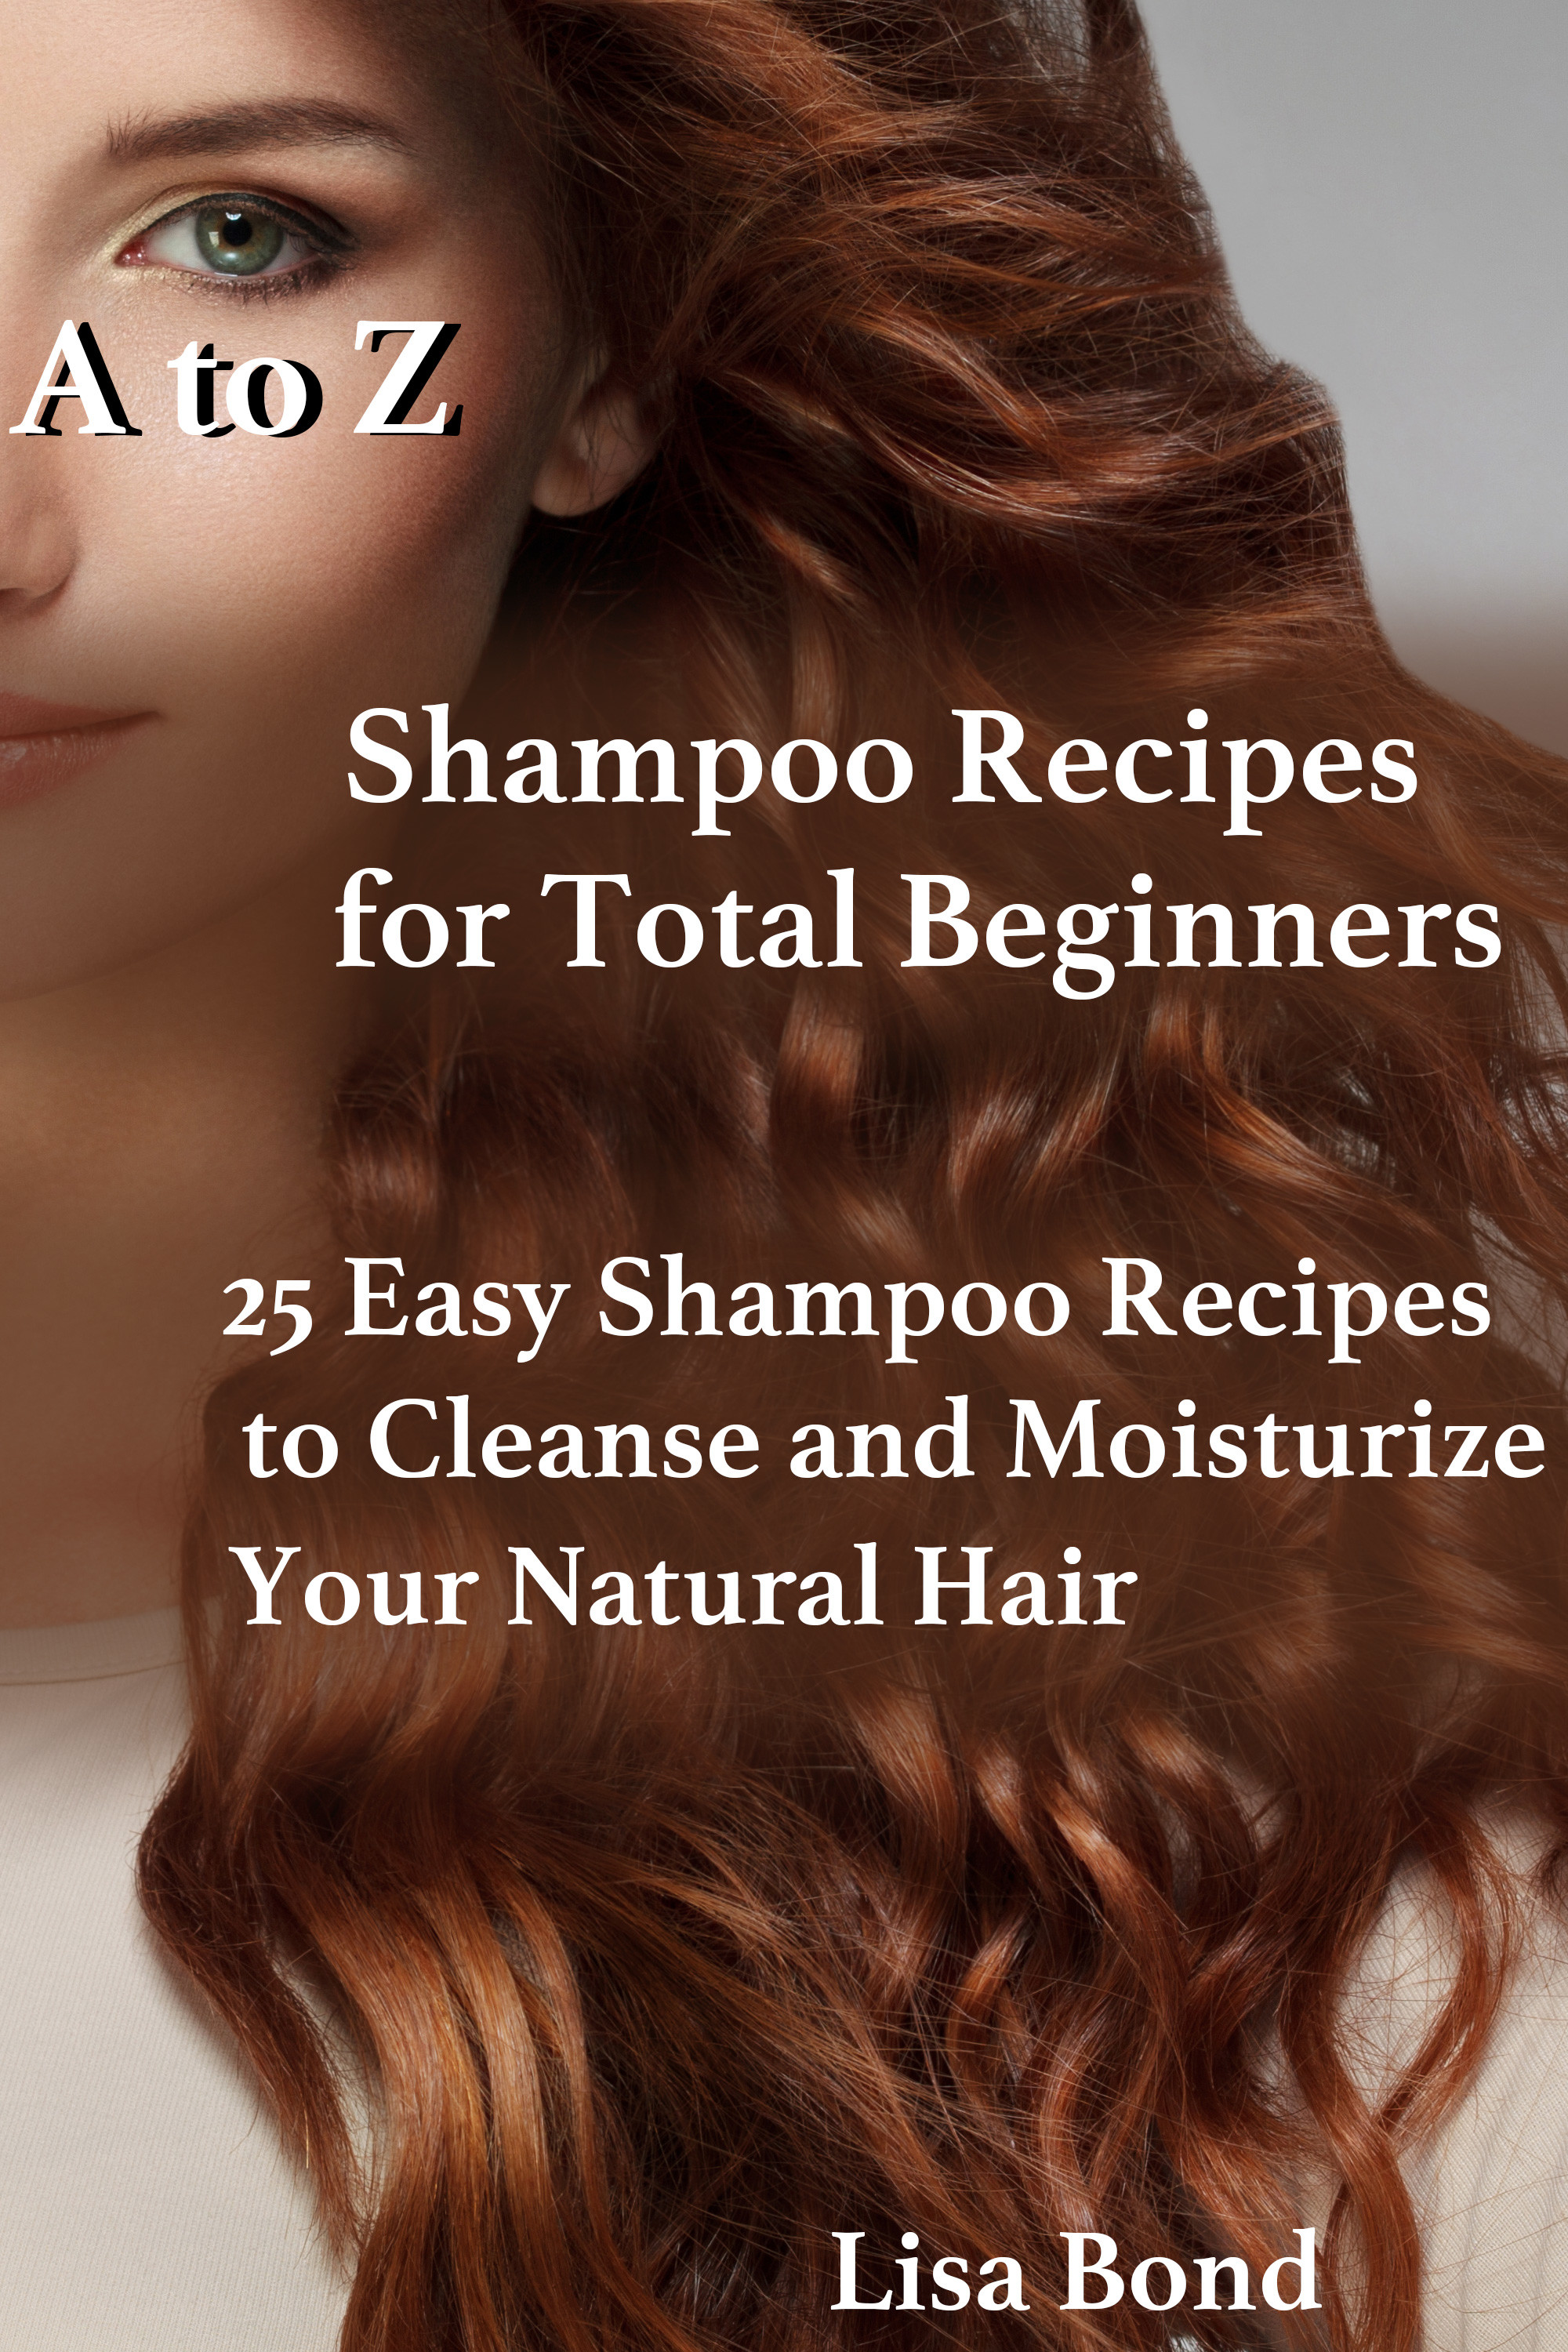 A to Z Shampoo Recipes for Total Beginners25 Easy Shampoo Recipes to Cleanse and Moisturize Your Natural Hair